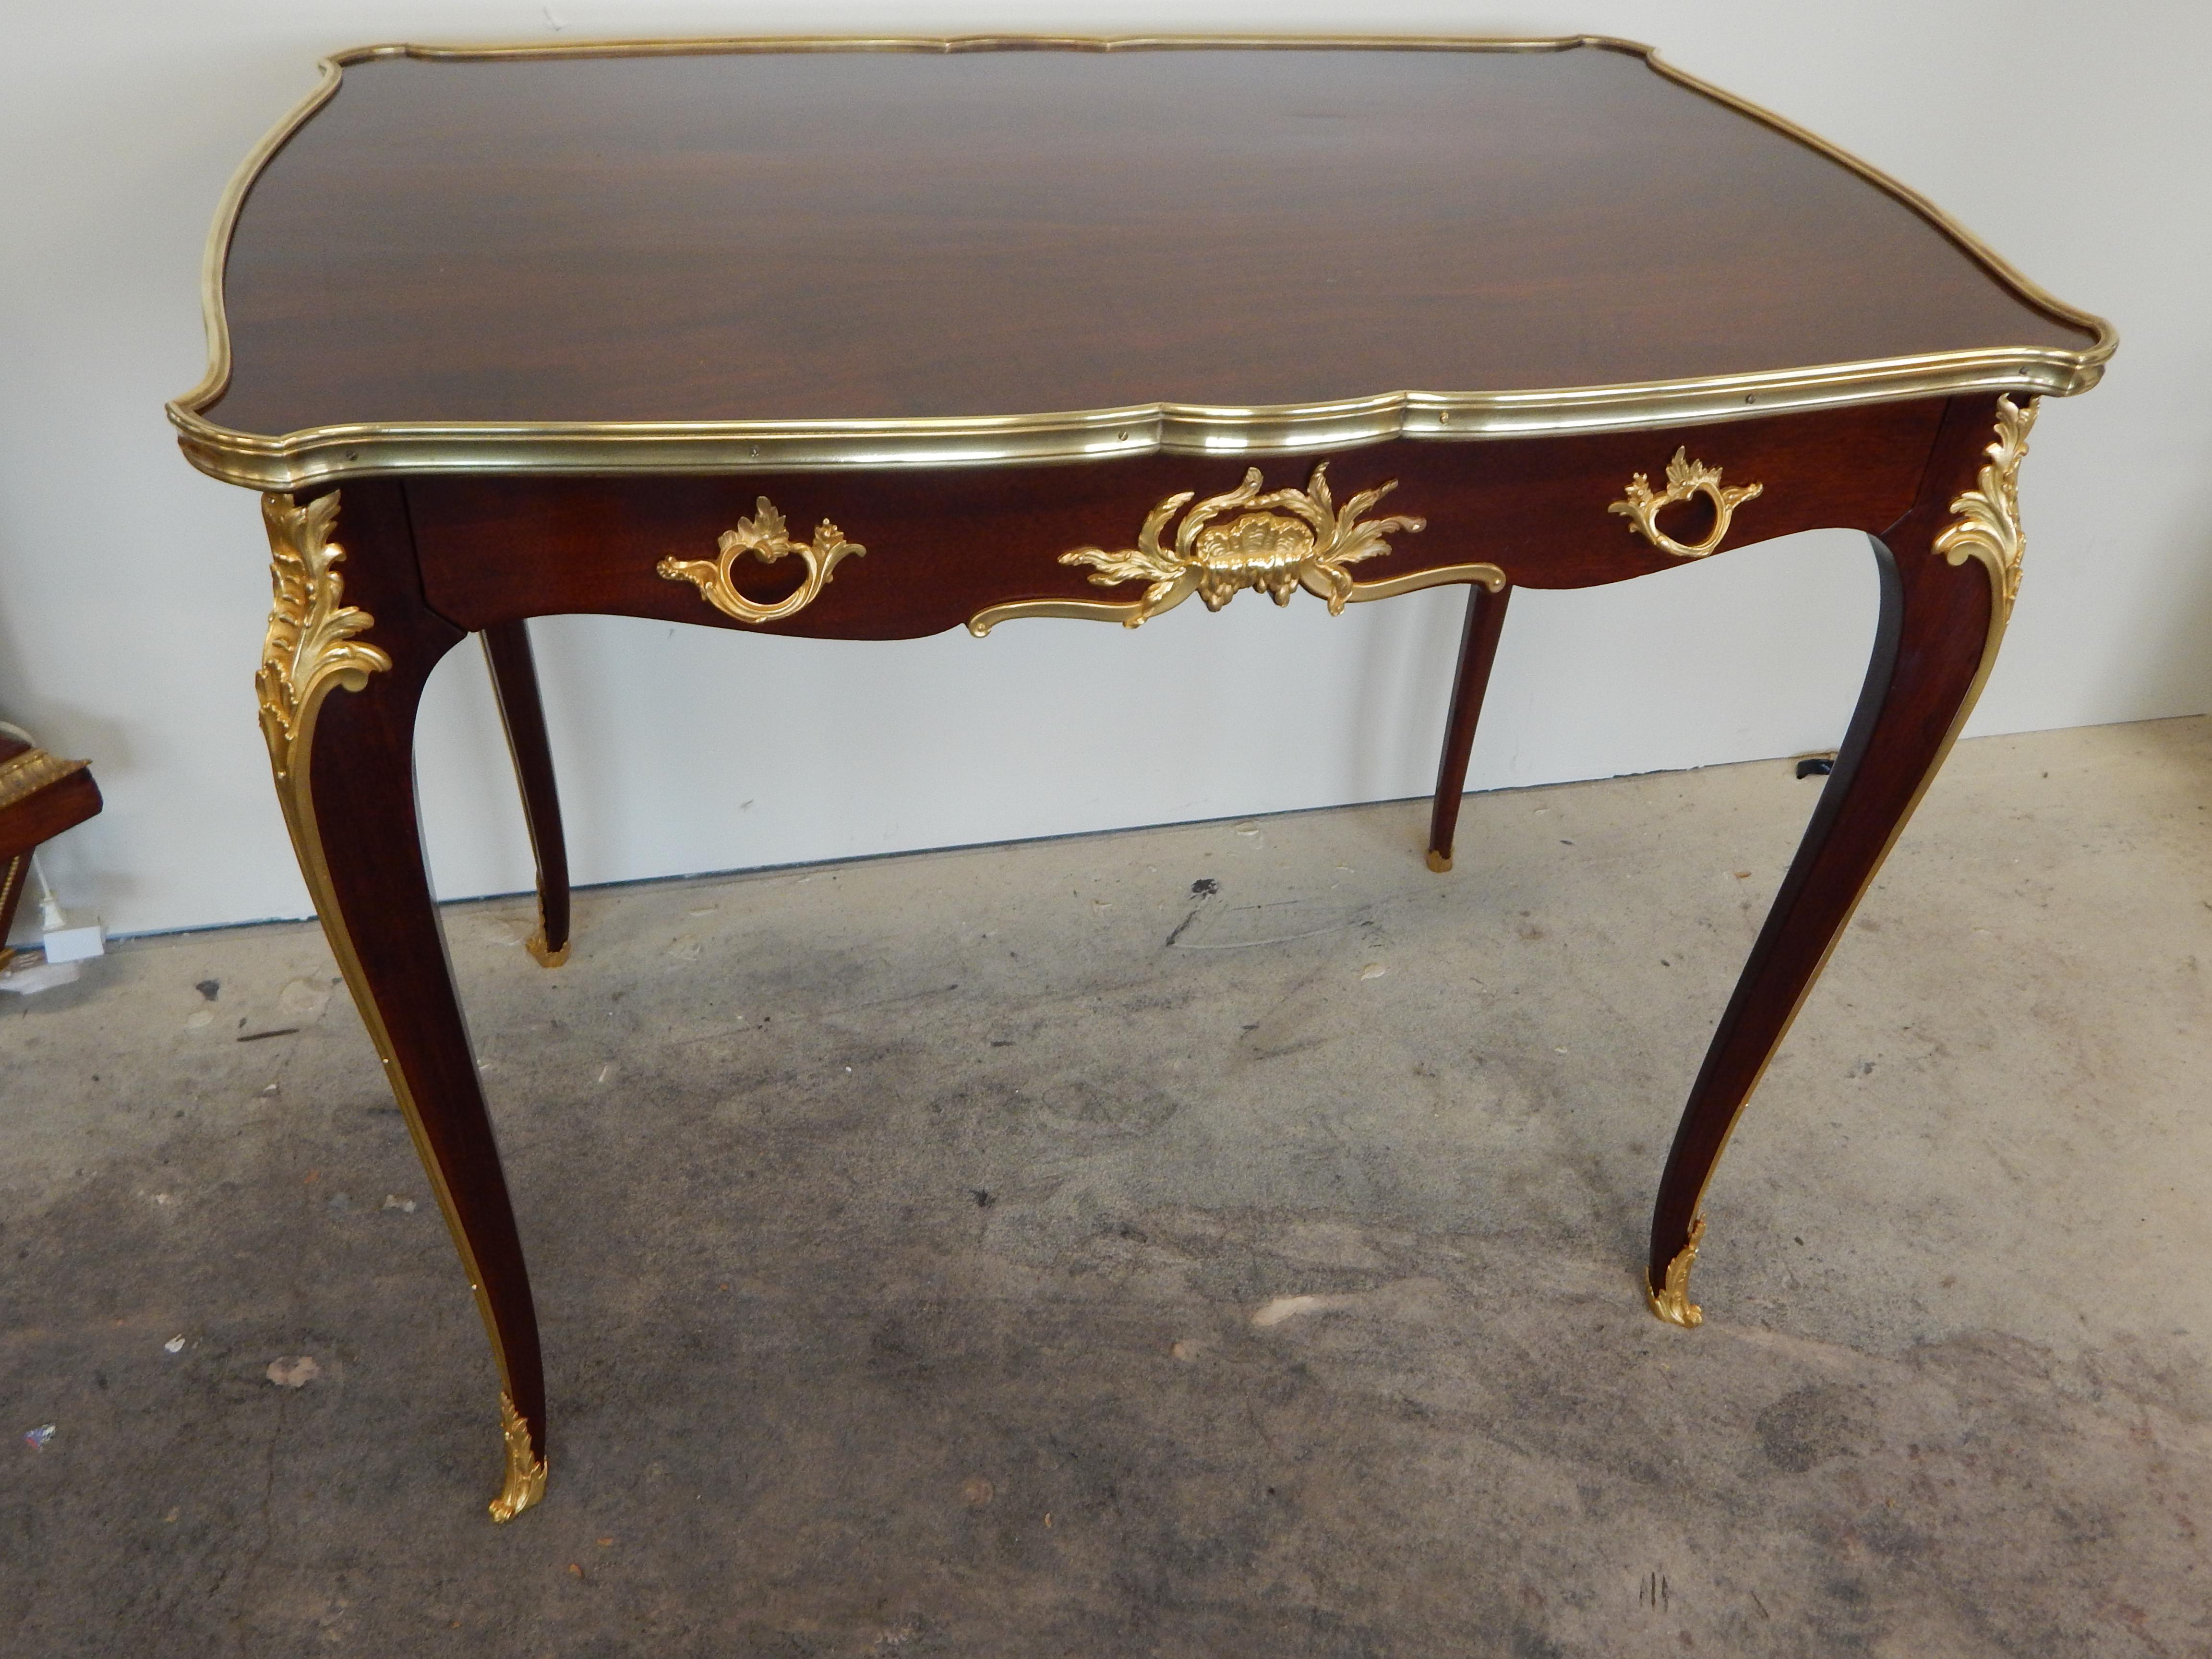 Fine Louis XV style ormolu-mounted ladies writing table by Francois Linke

A lovely, elegant Louis XV style bronze-mounted mahogany ladies writing table, or side table, with one drawer,
by Francois Linke. Bronzes stamped FL on the reverse.